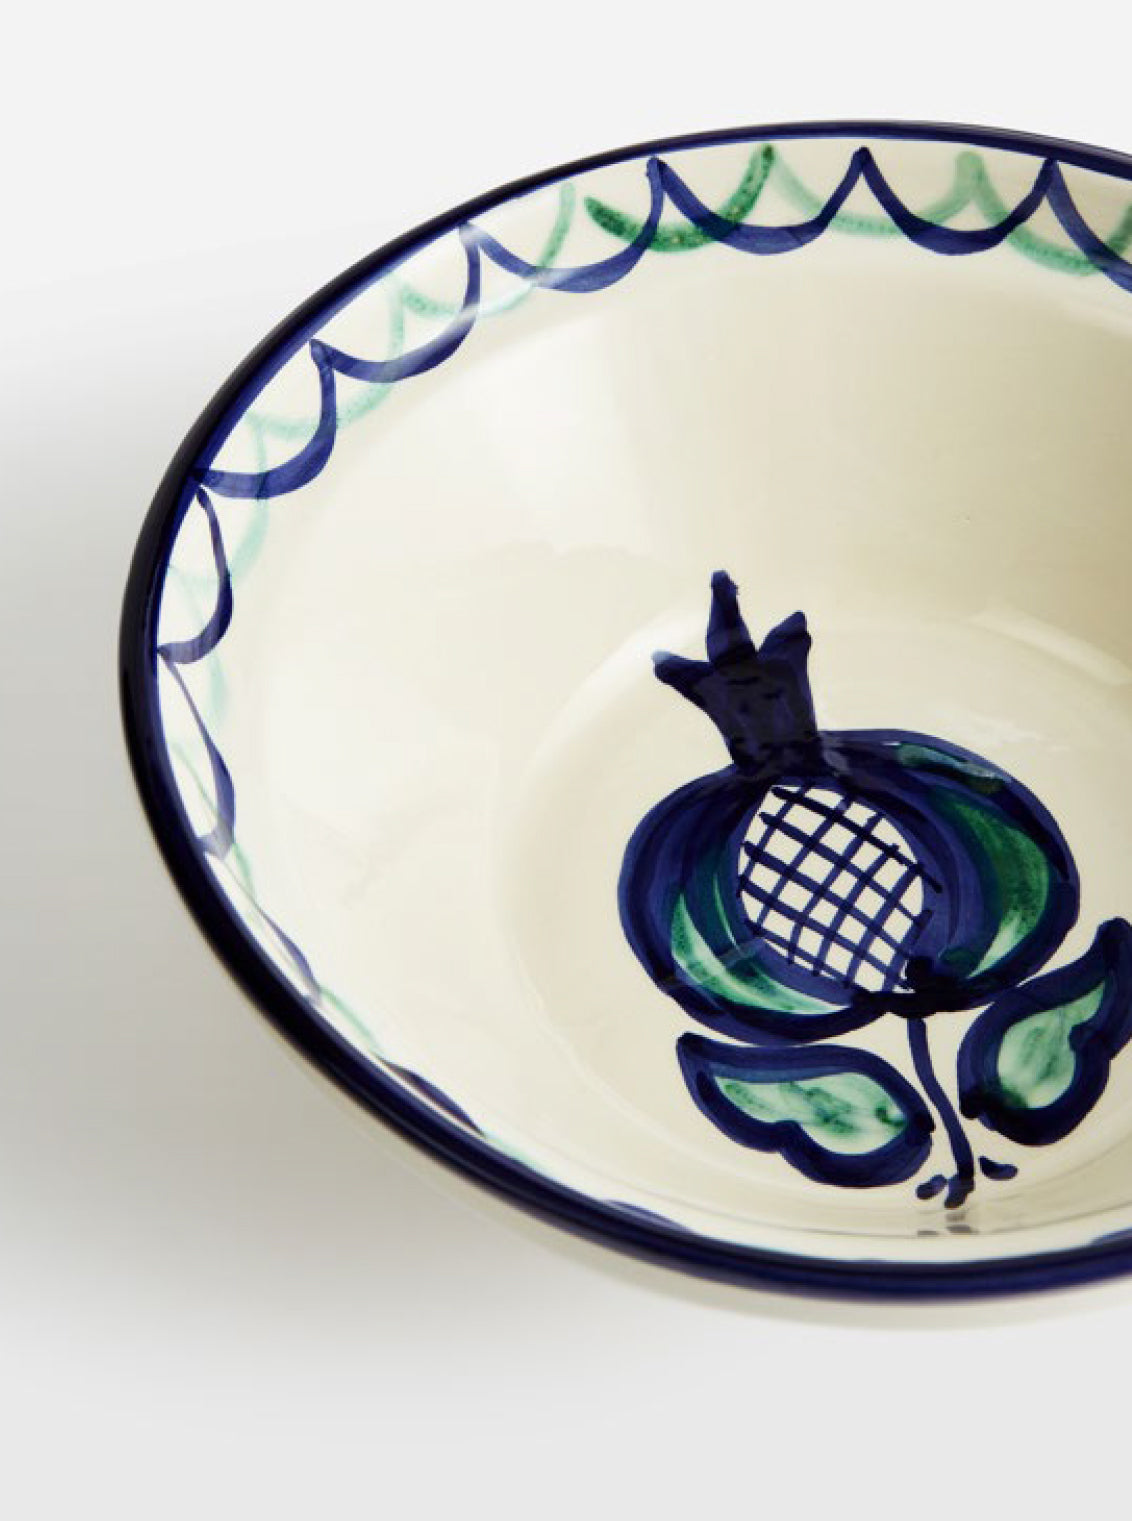 MEDIUM RIMMED BOWL - Part of our Soho Home Collection